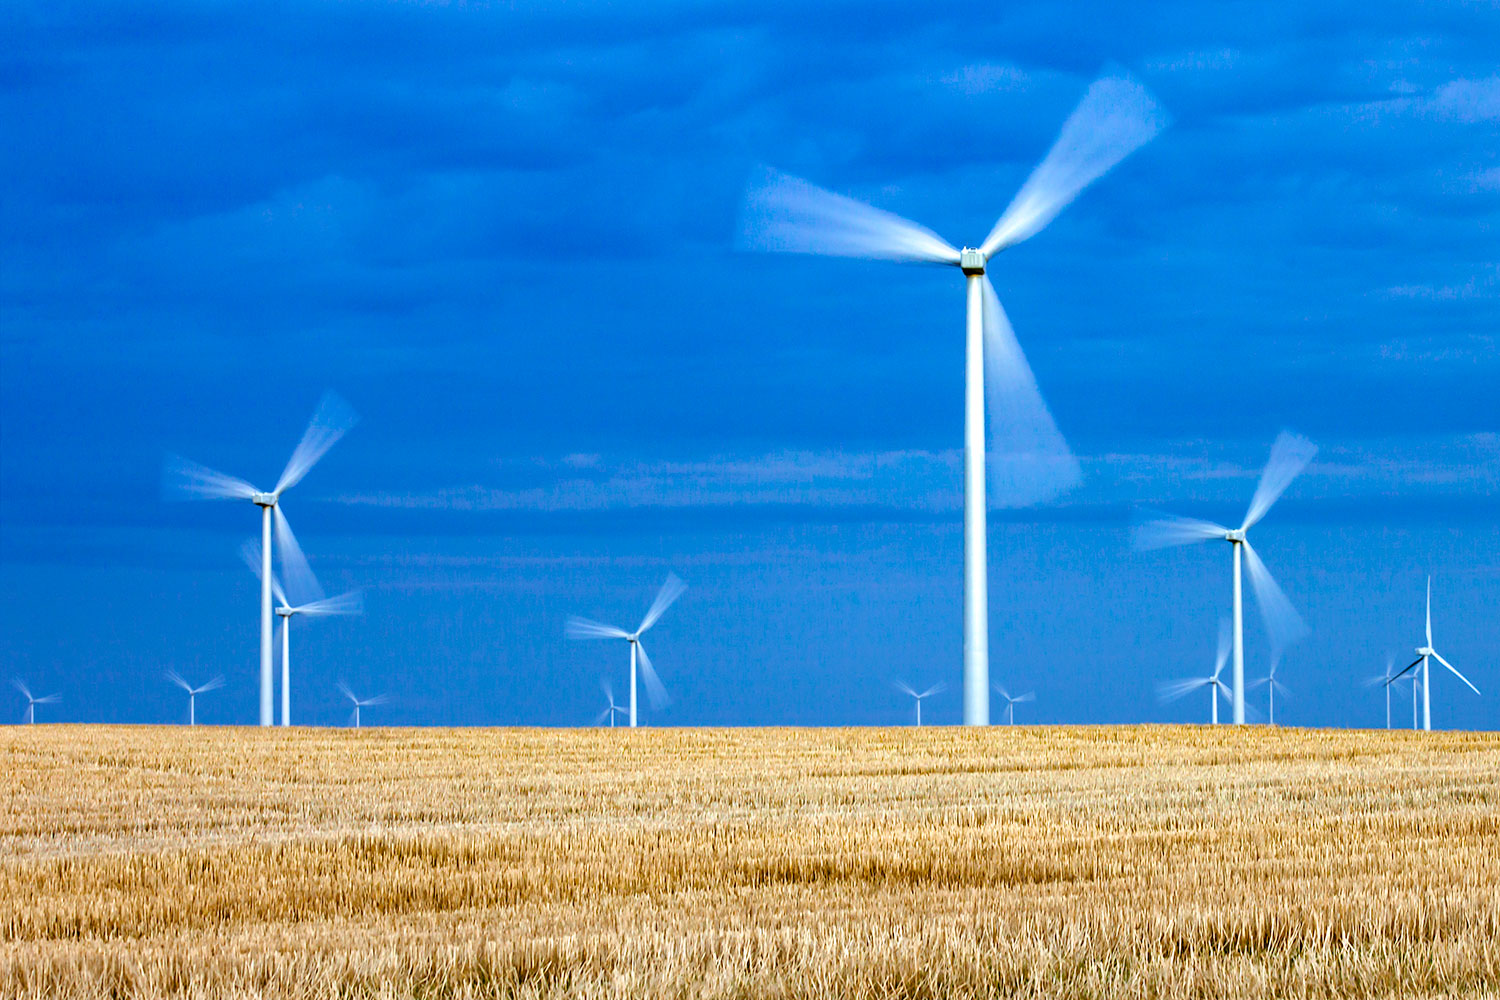 A time lapse photo of wind turbines in a field near Ethridge, Montana.&nbsp;→ Buy a Print&nbsp;or License Photo